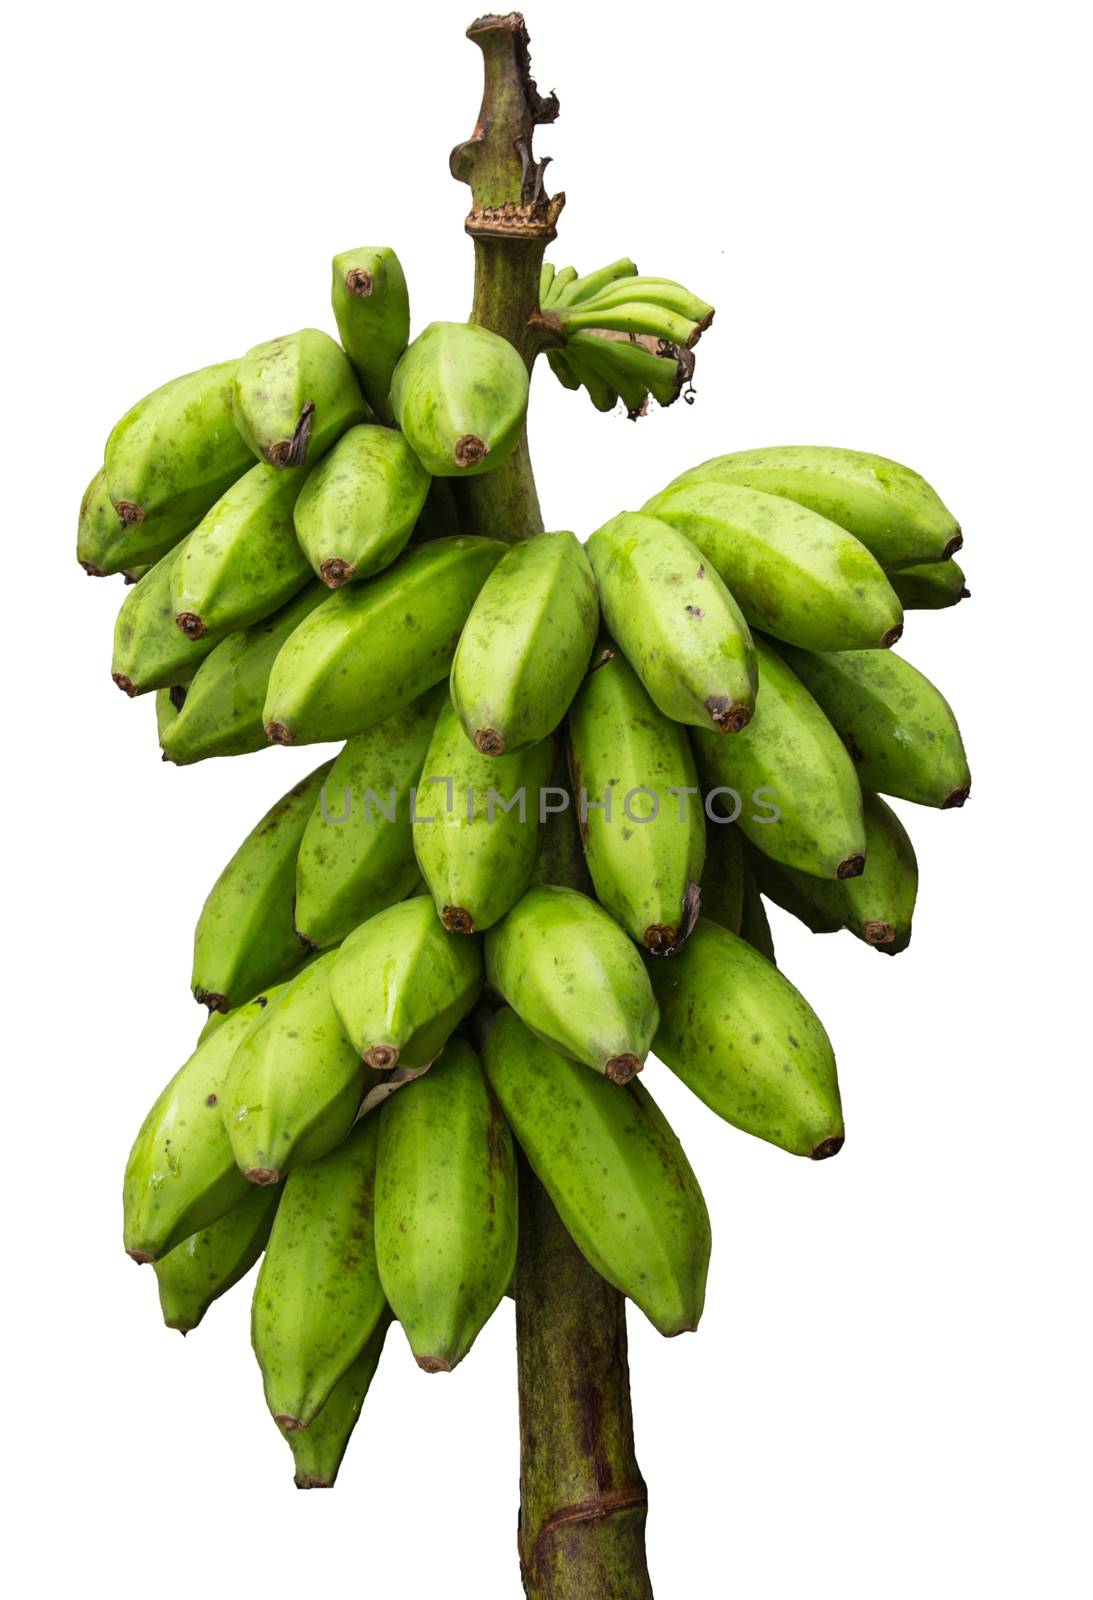 The Green banana bunch isolated on white background.